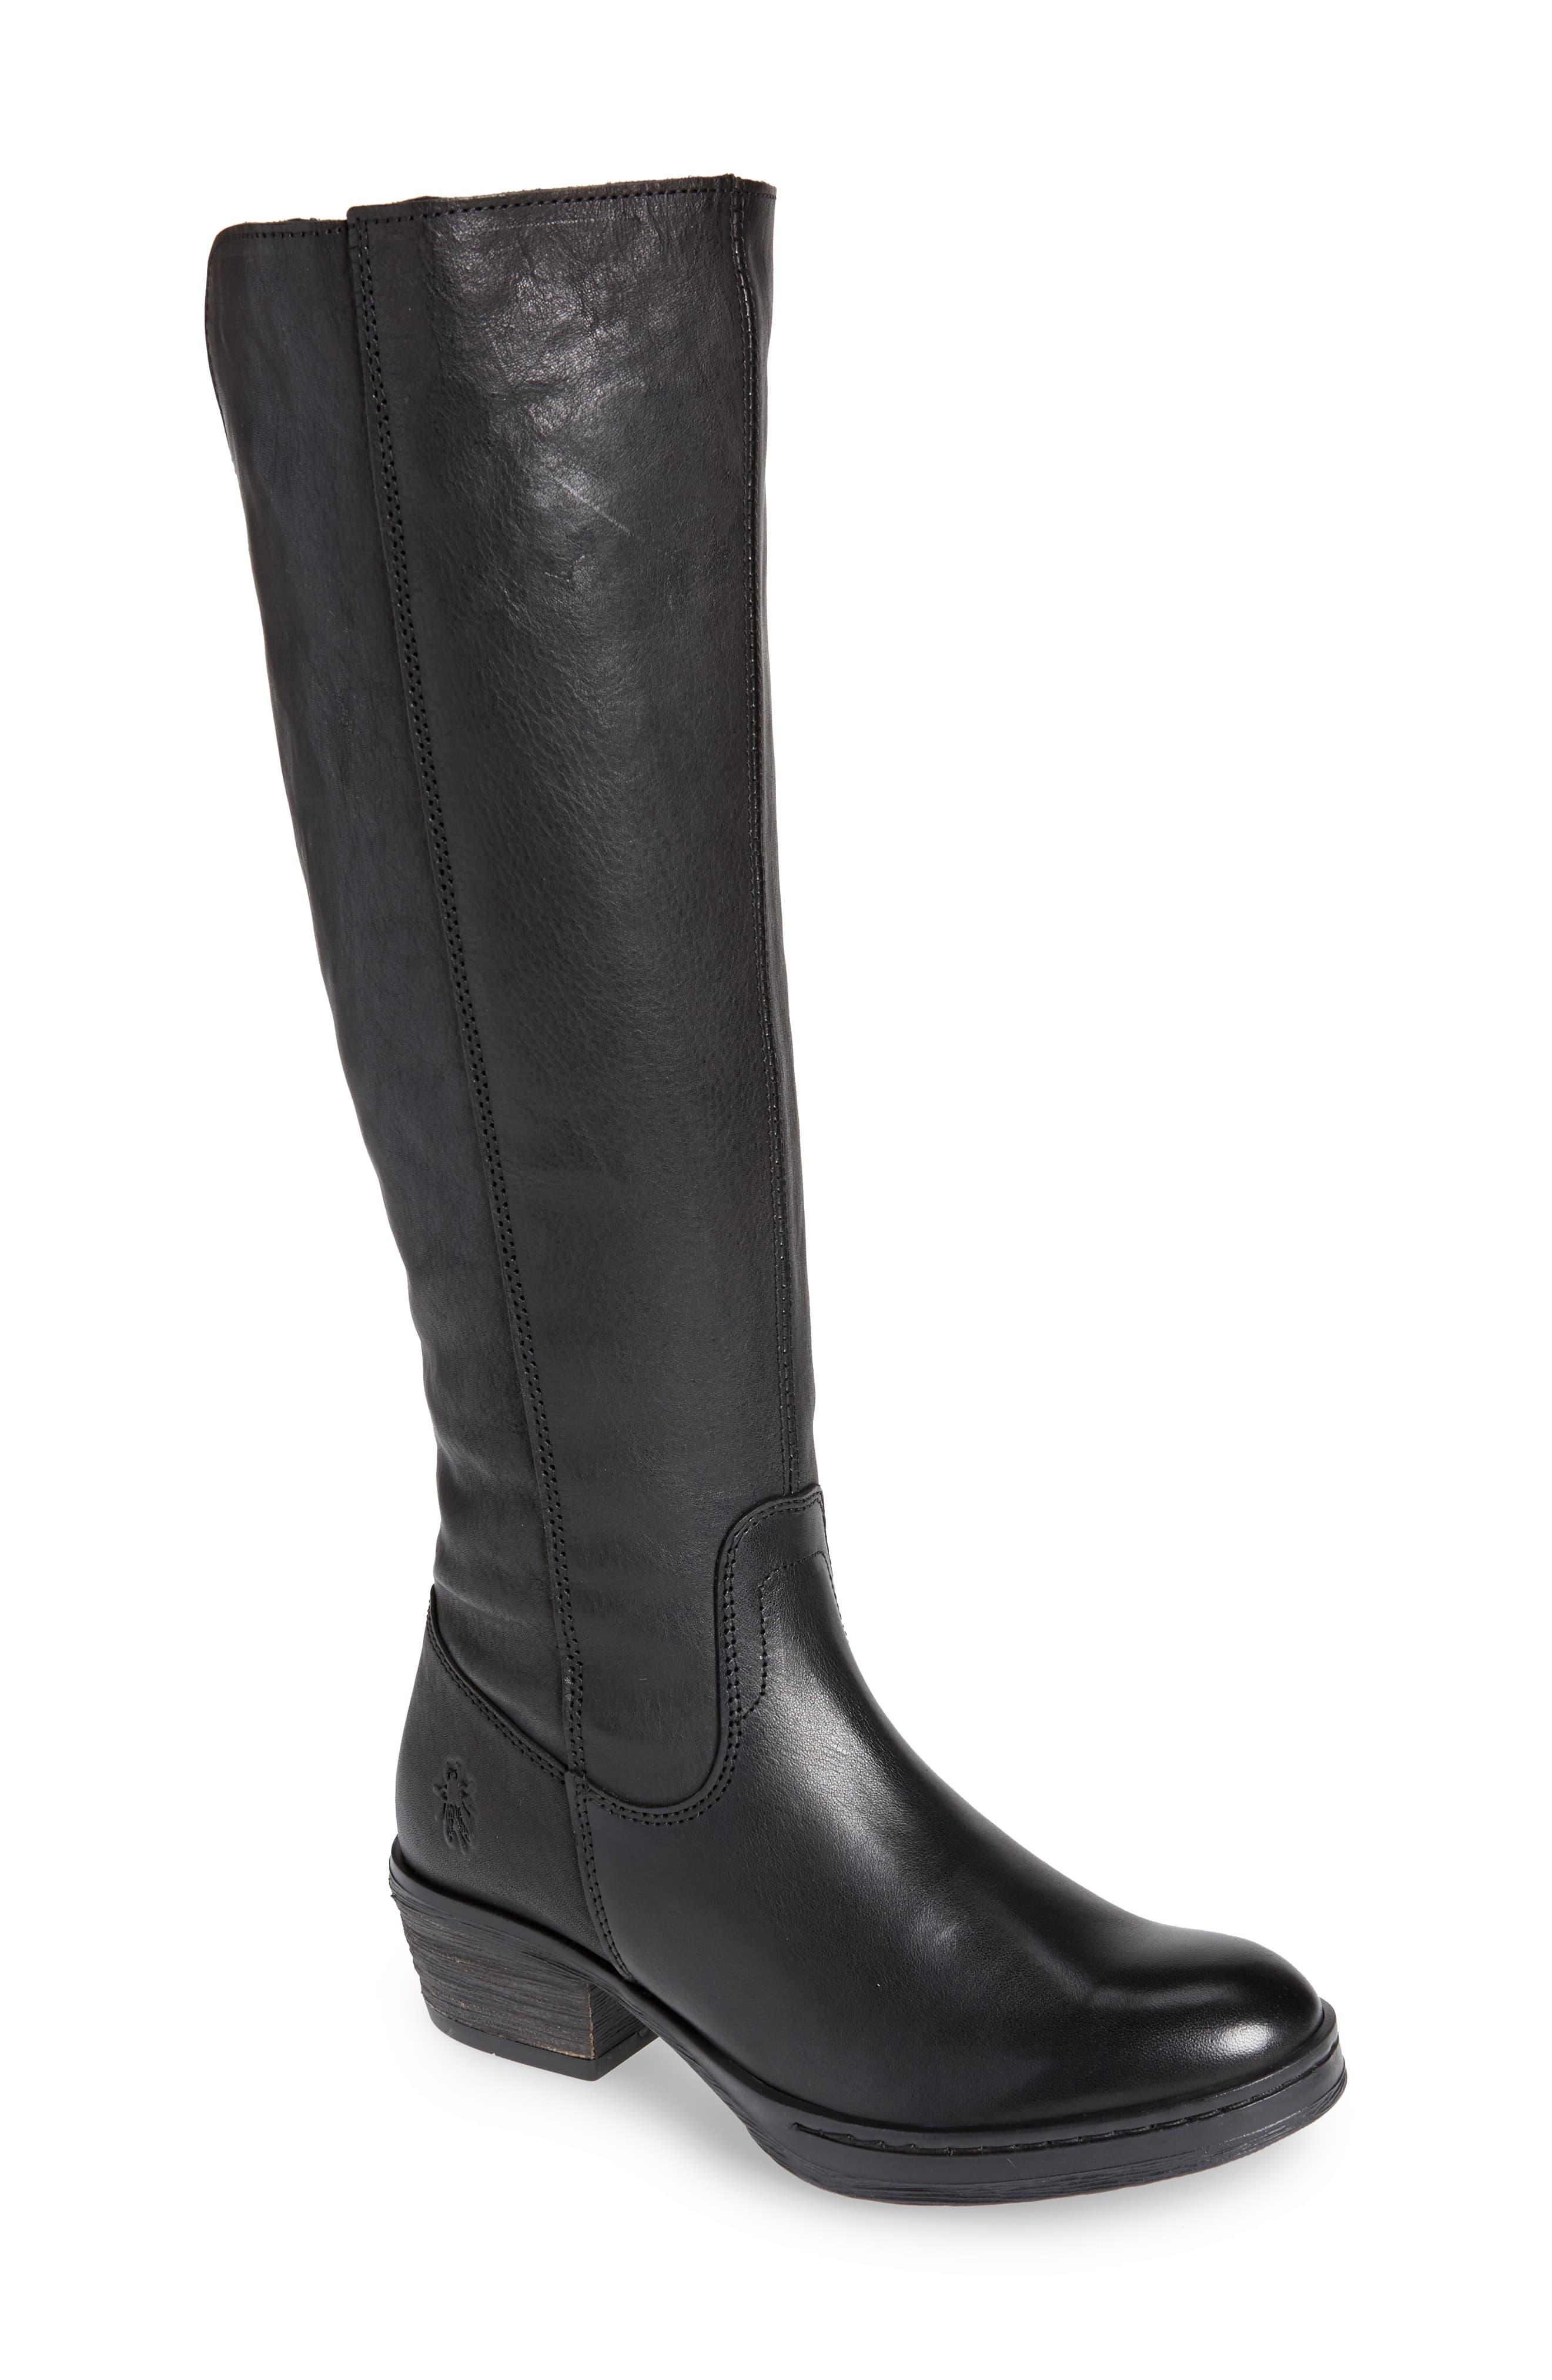 Fly London Chom Tall Boot in Black - Lyst